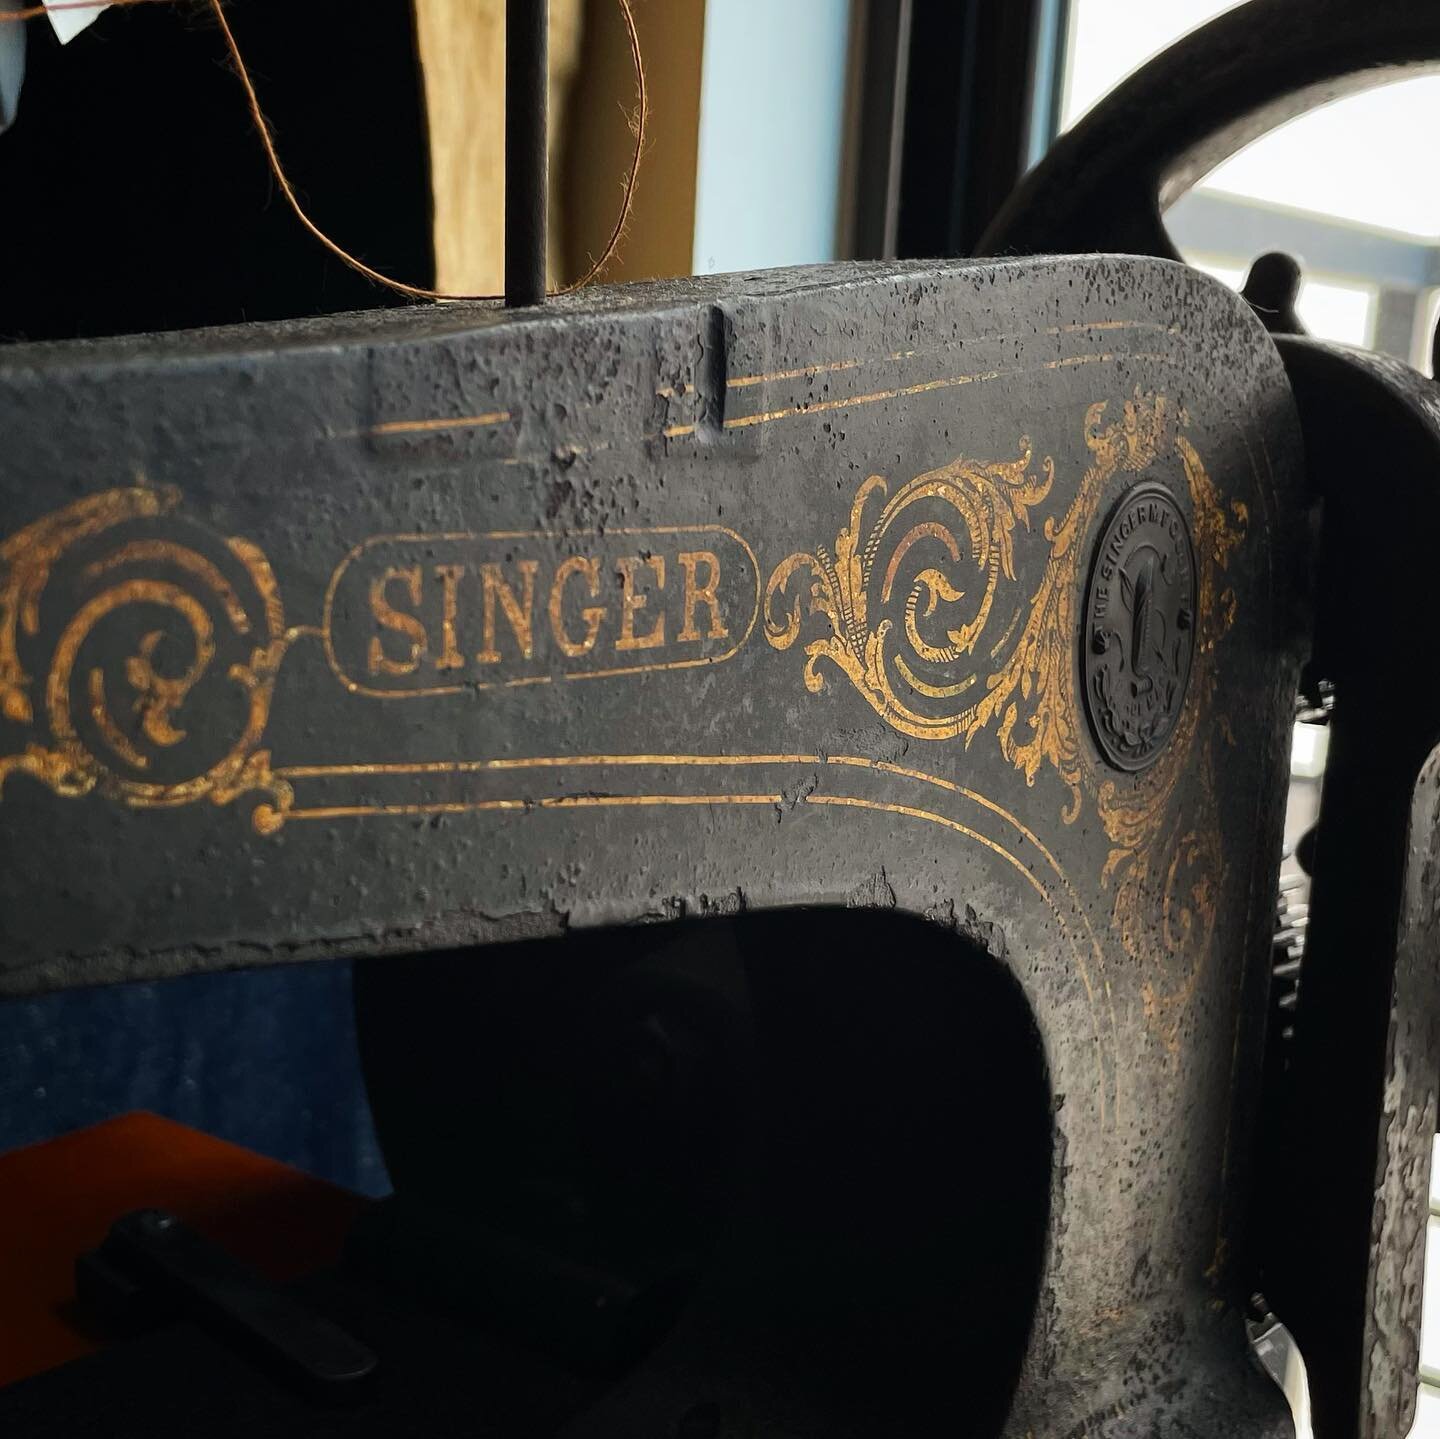 Time-honored machine, she drives me crazy. Have a nice weekend. #singerno2 #jacobdavis #1881